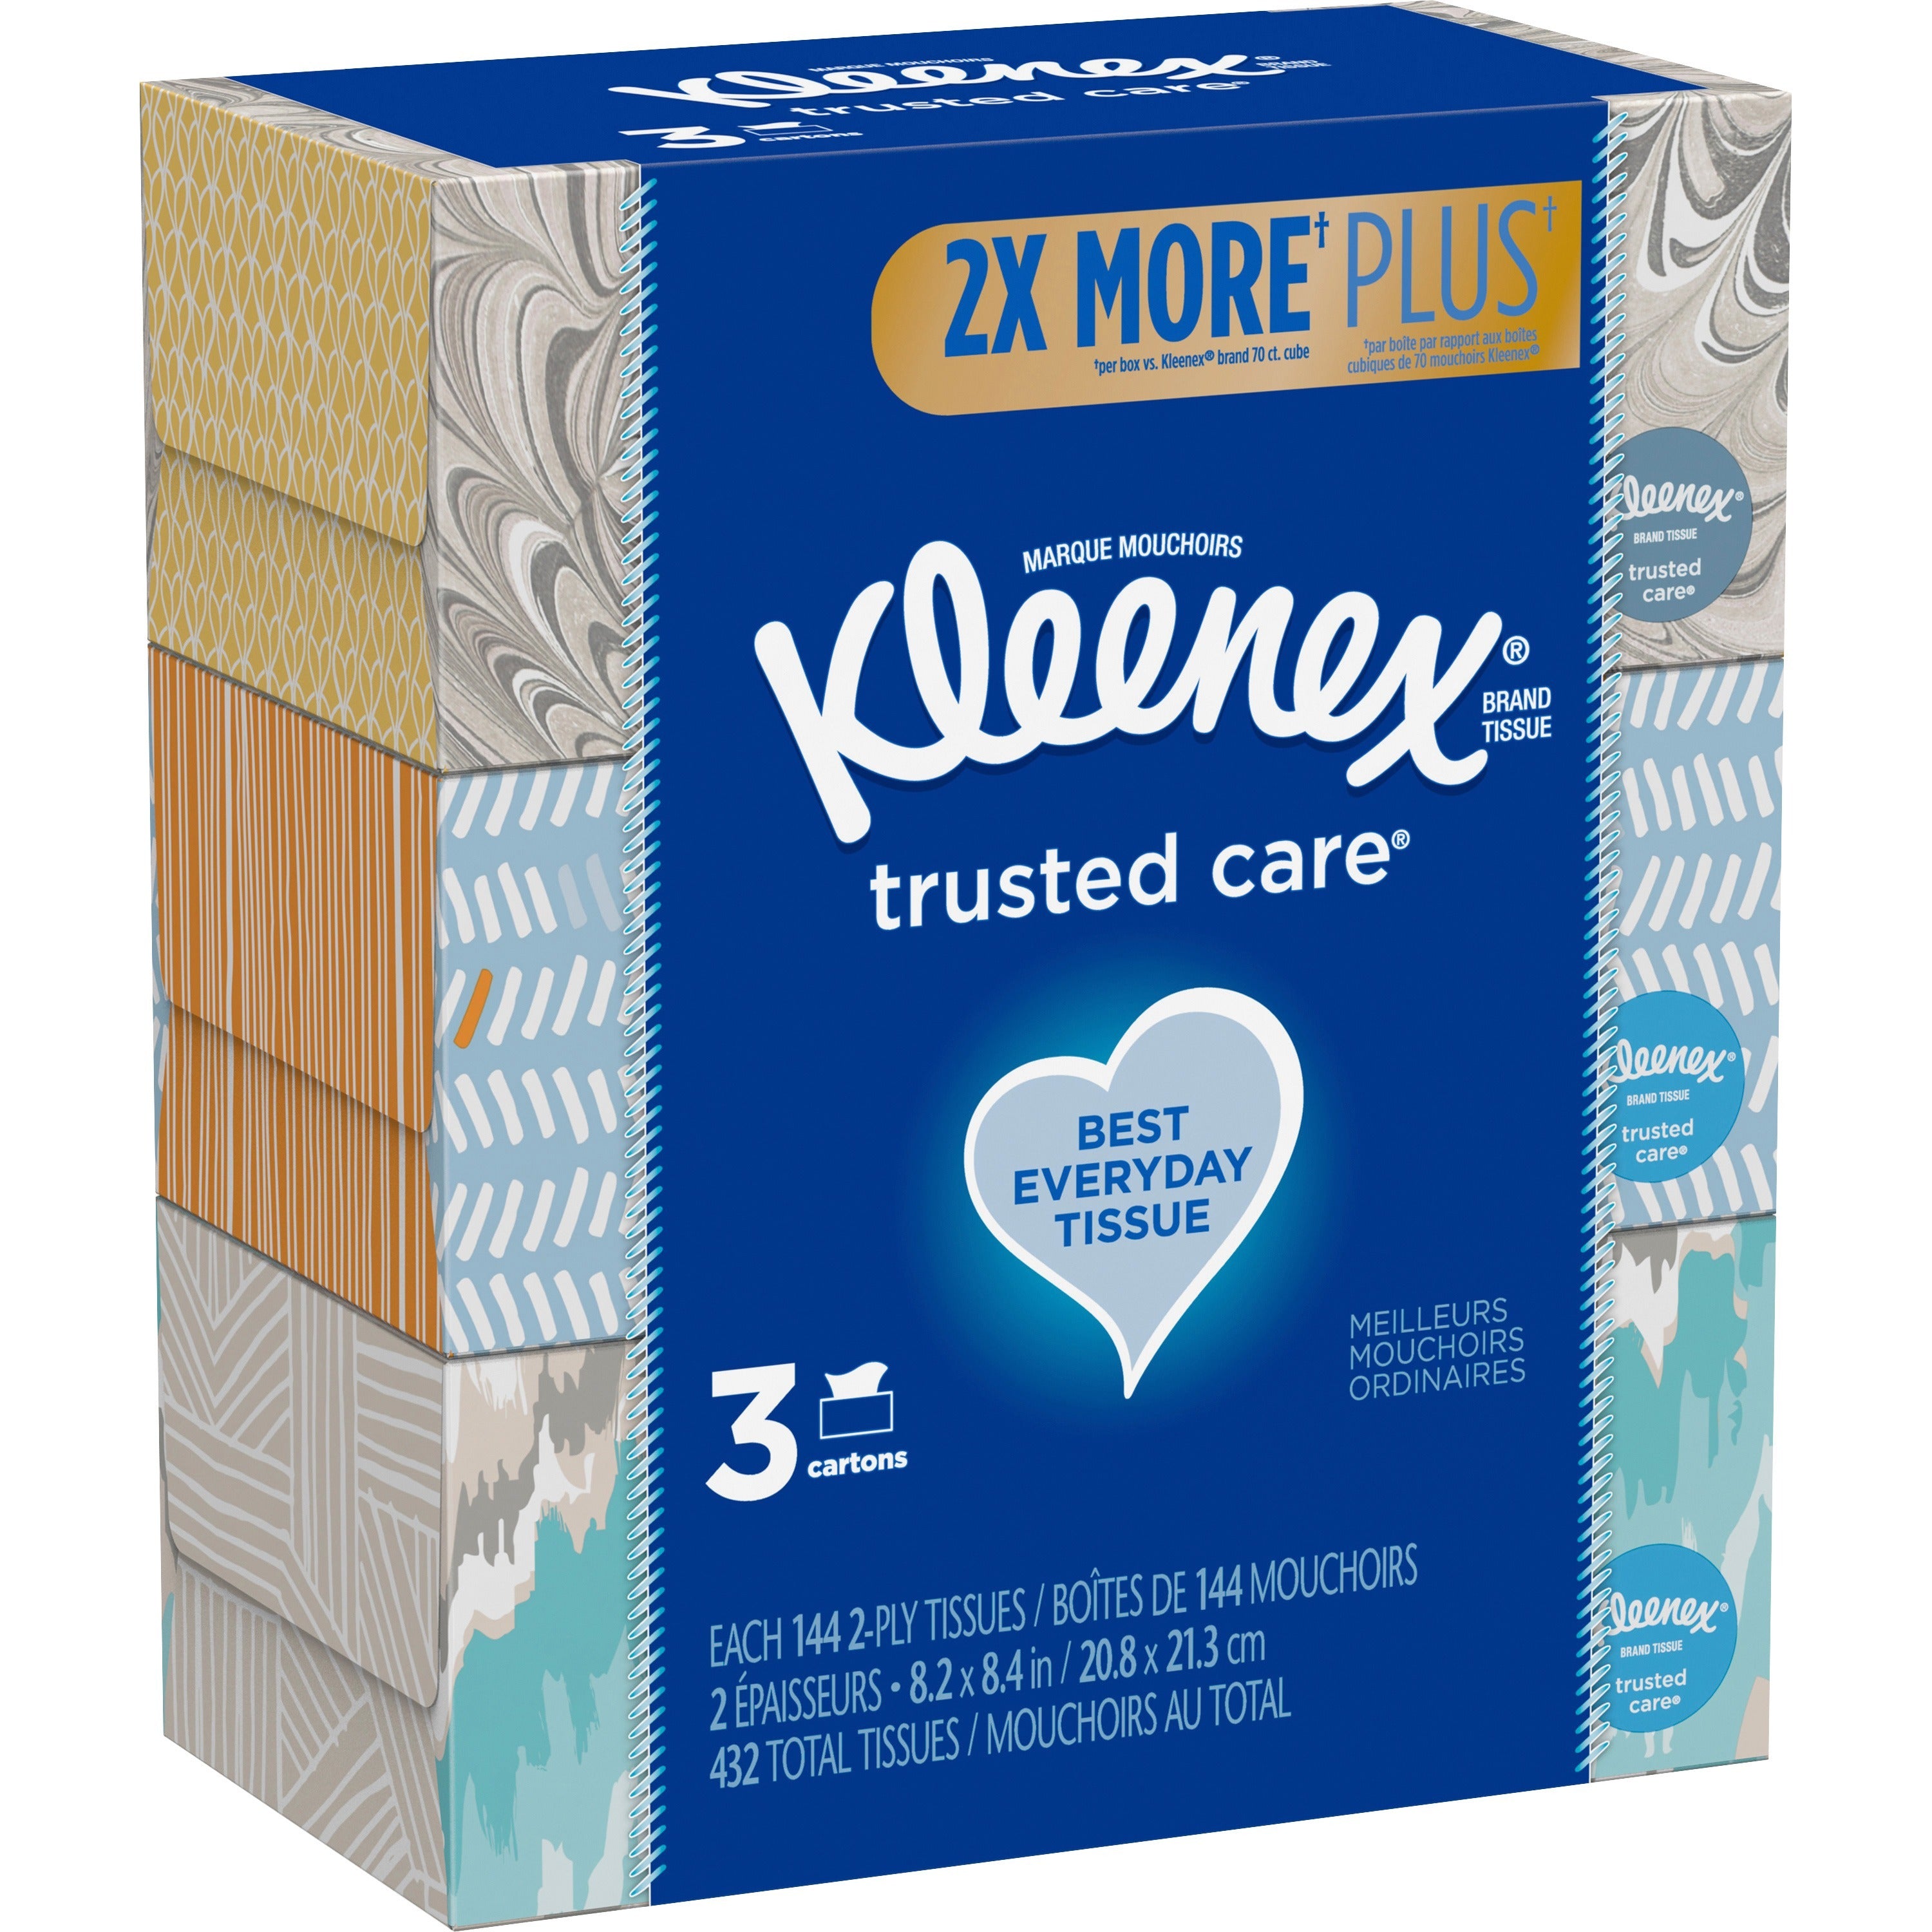 kleenex-trusted-care-facial-tissues-2-ply-820-x-840-white-strong-soft-absorbent-durable-for-home-office-school-144-per-box-12-carton_kcc50219ct - 4